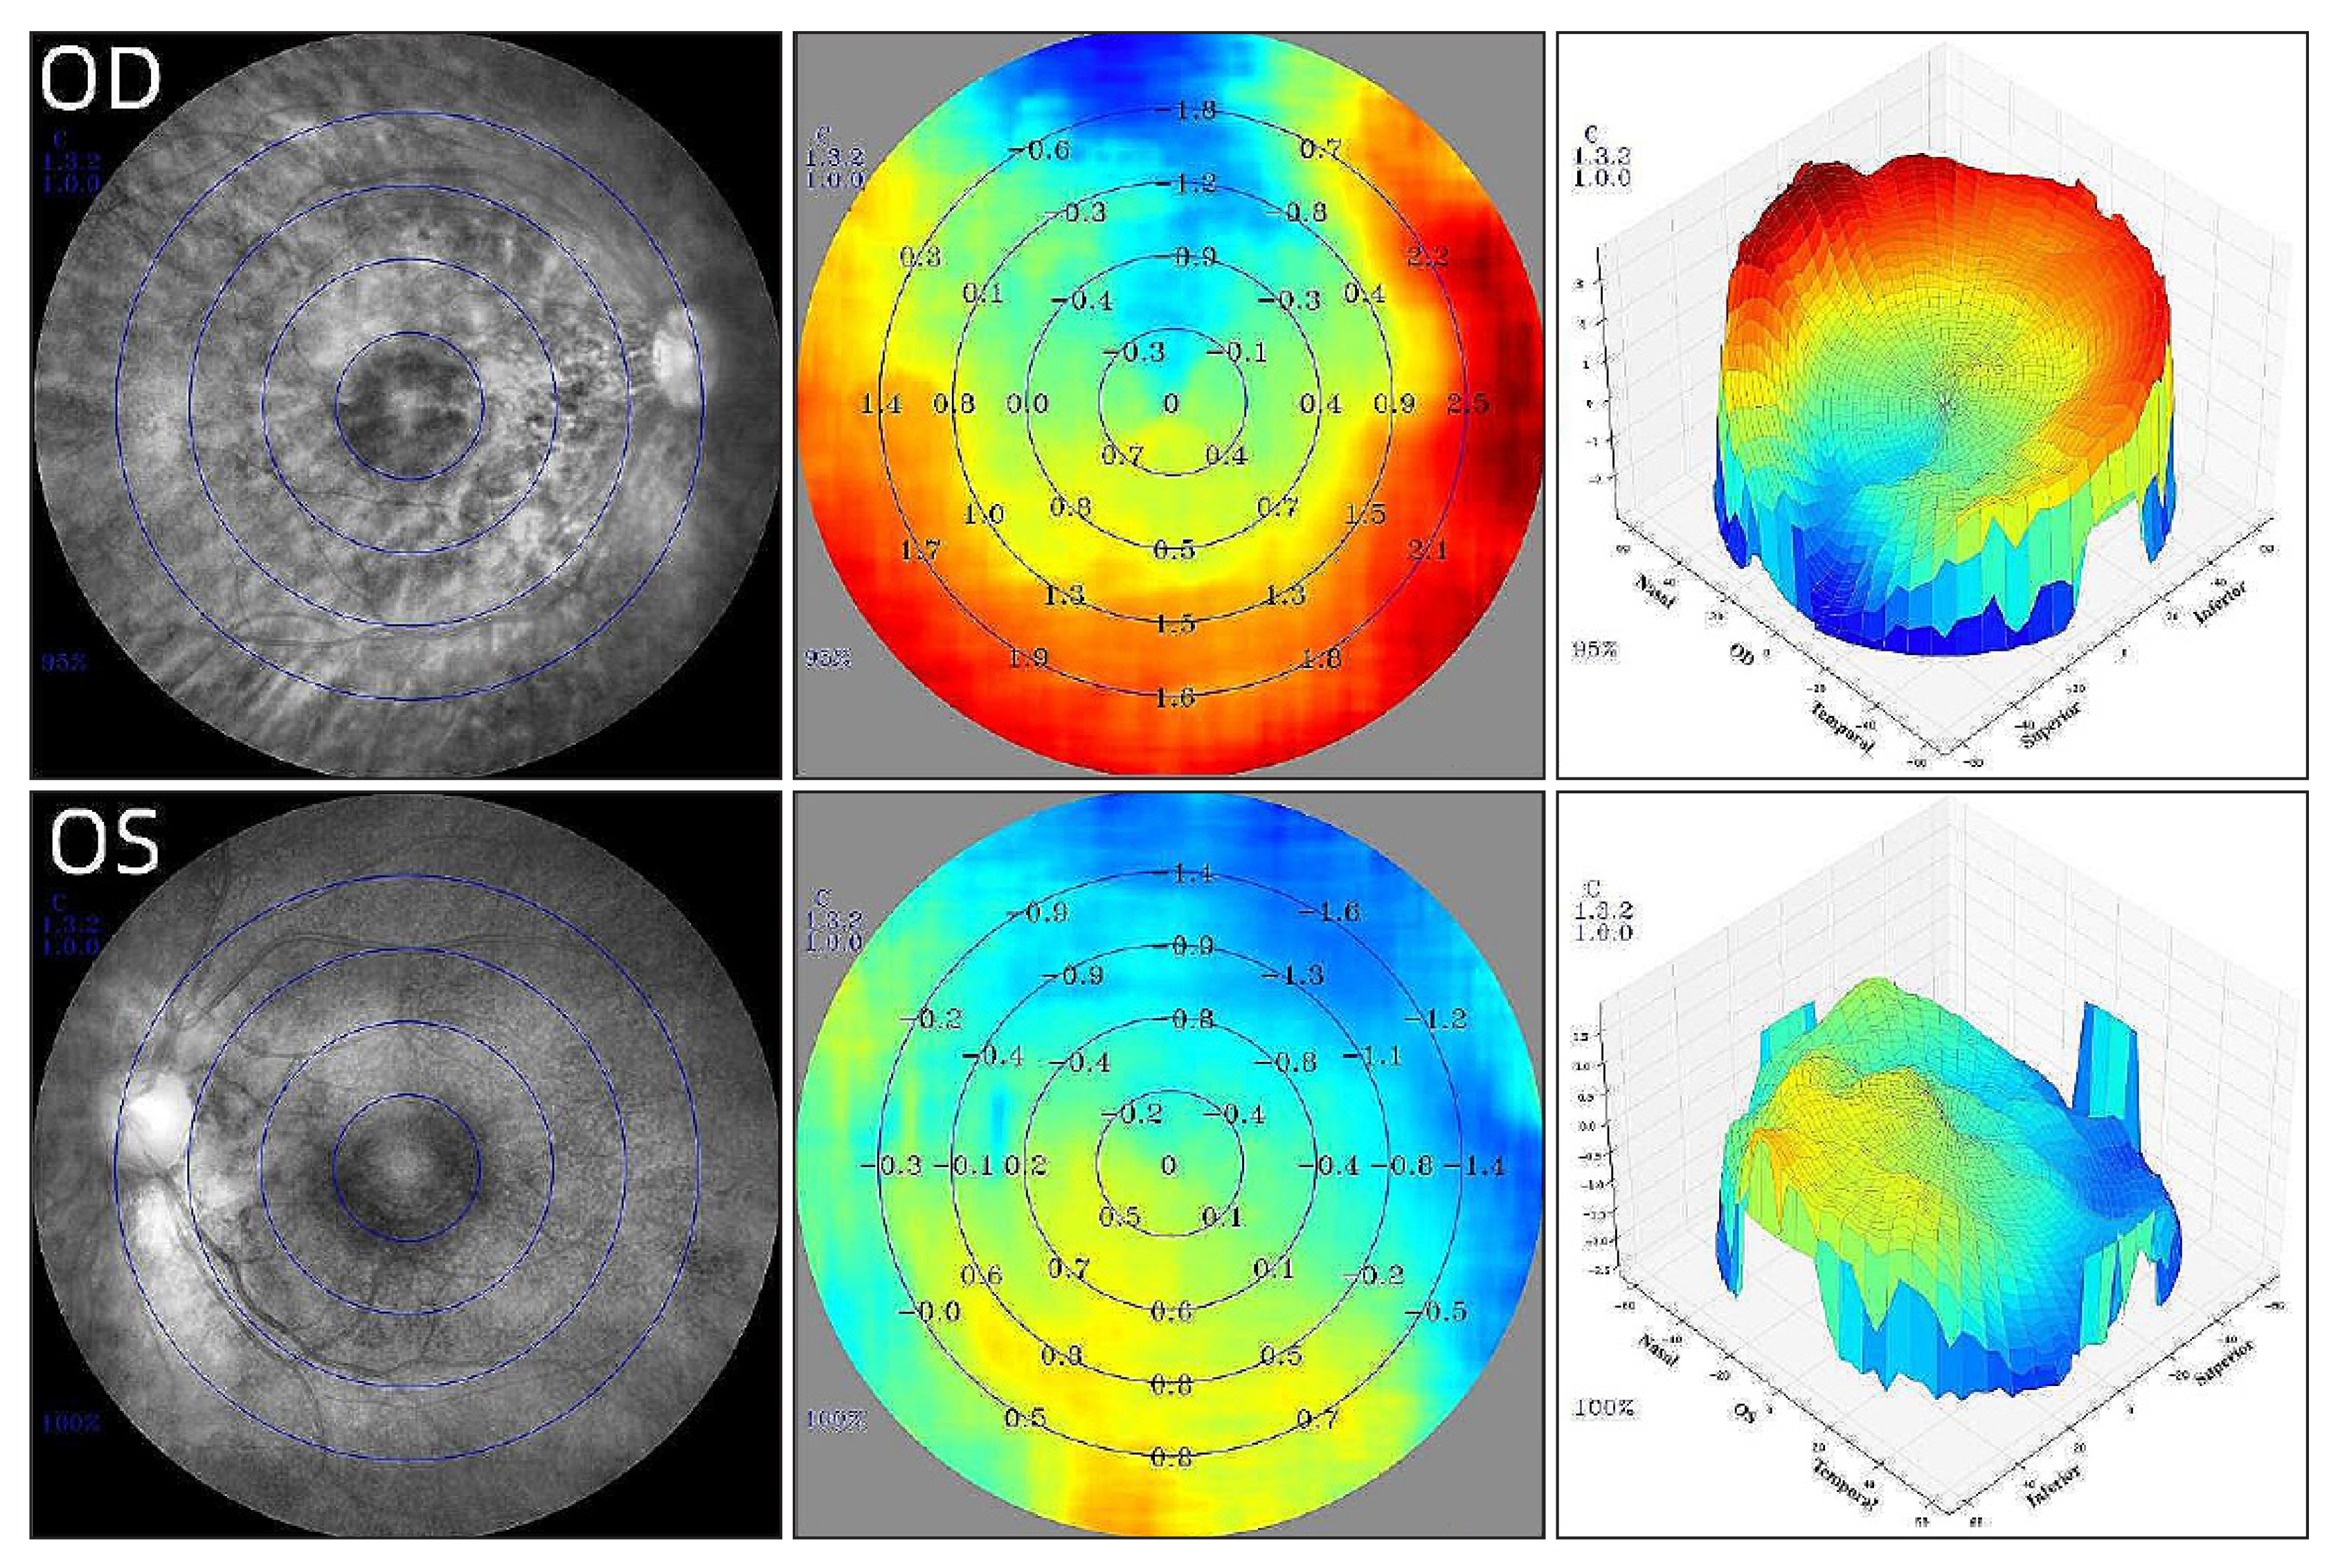 Using multispectral refraction topography, researchers found that eyes with greater myopia exhibited more hyperopic peripheral defocus in the context of anisometropia. Additionally, there were significant differences in defocus values at the inferior and temporal positions between the myopia eyes group and the fellow eyes group. This emerging technology might one day be able to refine the assessment of pediatric myopia and help clinicians tailor a treatment approach to each individual.